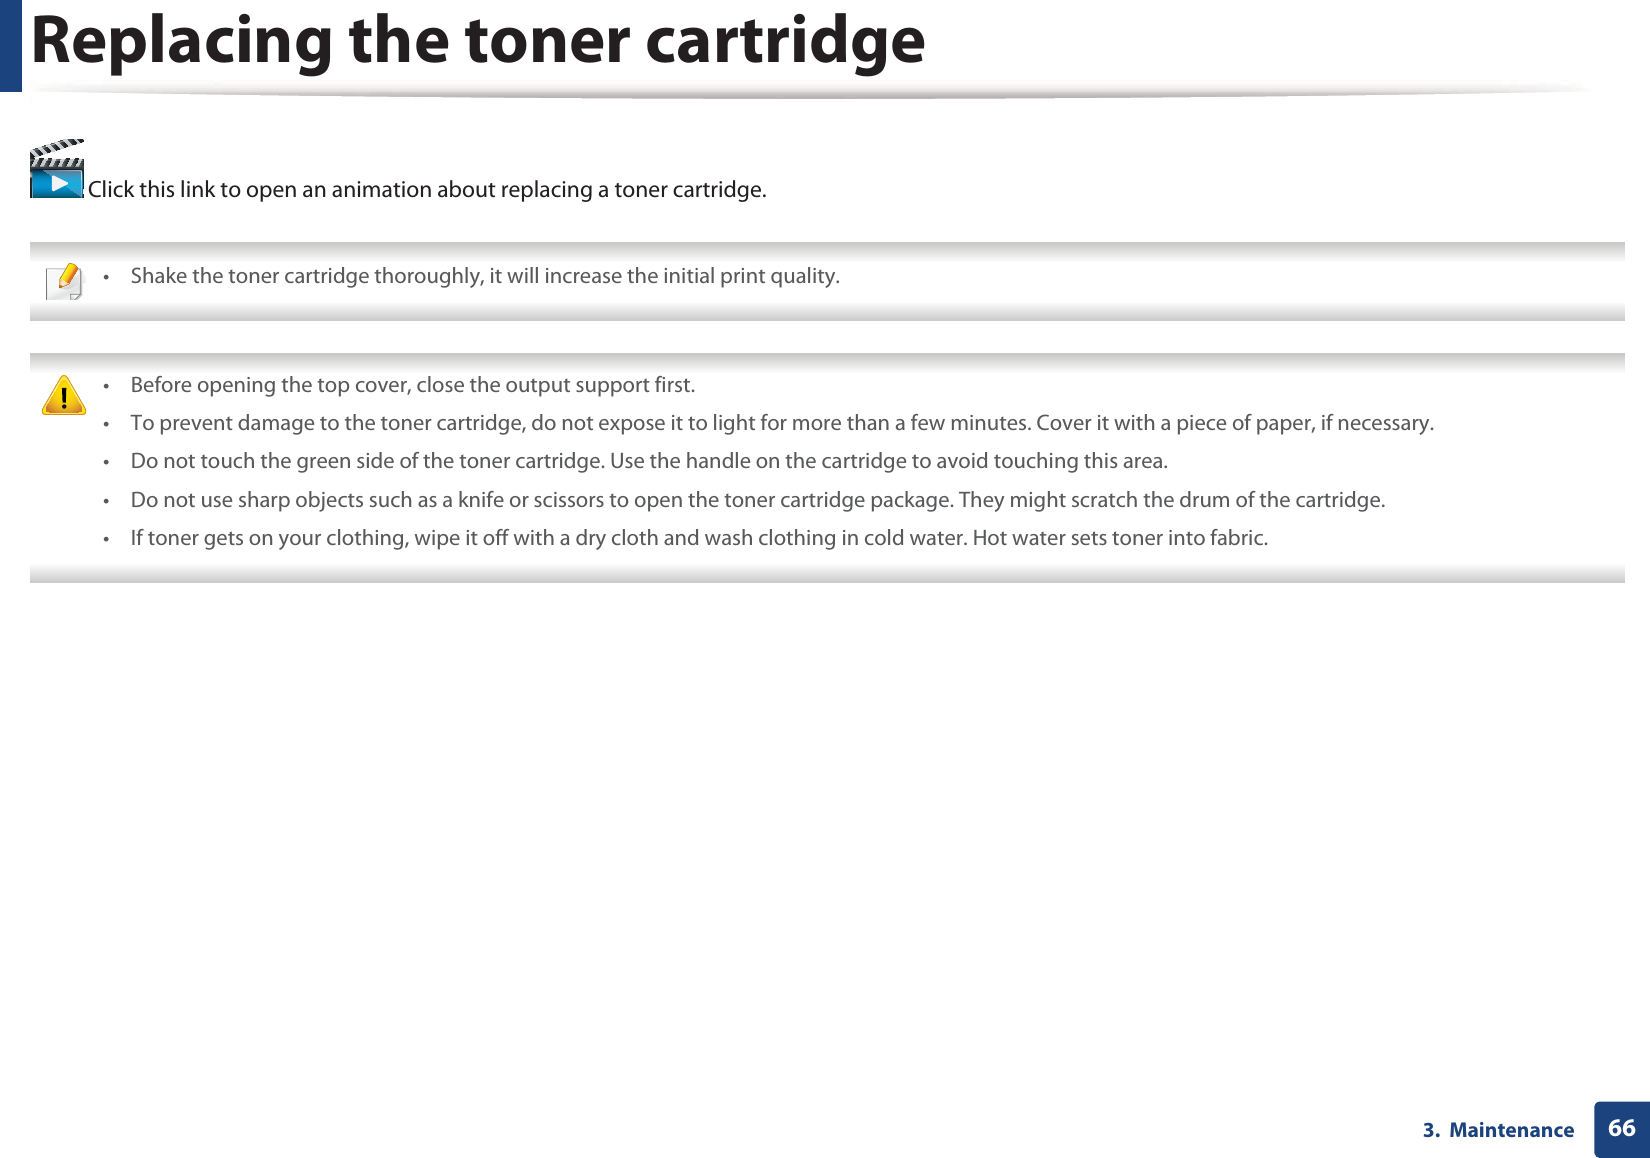 663.  MaintenanceReplacing the toner cartridge Click this link to open an animation about replacing a toner cartridge. • Shake the toner cartridge thoroughly, it will increase the initial print quality.  • Before opening the top cover, close the output support first.• To prevent damage to the toner cartridge, do not expose it to light for more than a few minutes. Cover it with a piece of paper, if necessary.• Do not touch the green side of the toner cartridge. Use the handle on the cartridge to avoid touching this area. • Do not use sharp objects such as a knife or scissors to open the toner cartridge package. They might scratch the drum of the cartridge.• If toner gets on your clothing, wipe it off with a dry cloth and wash clothing in cold water. Hot water sets toner into fabric. 